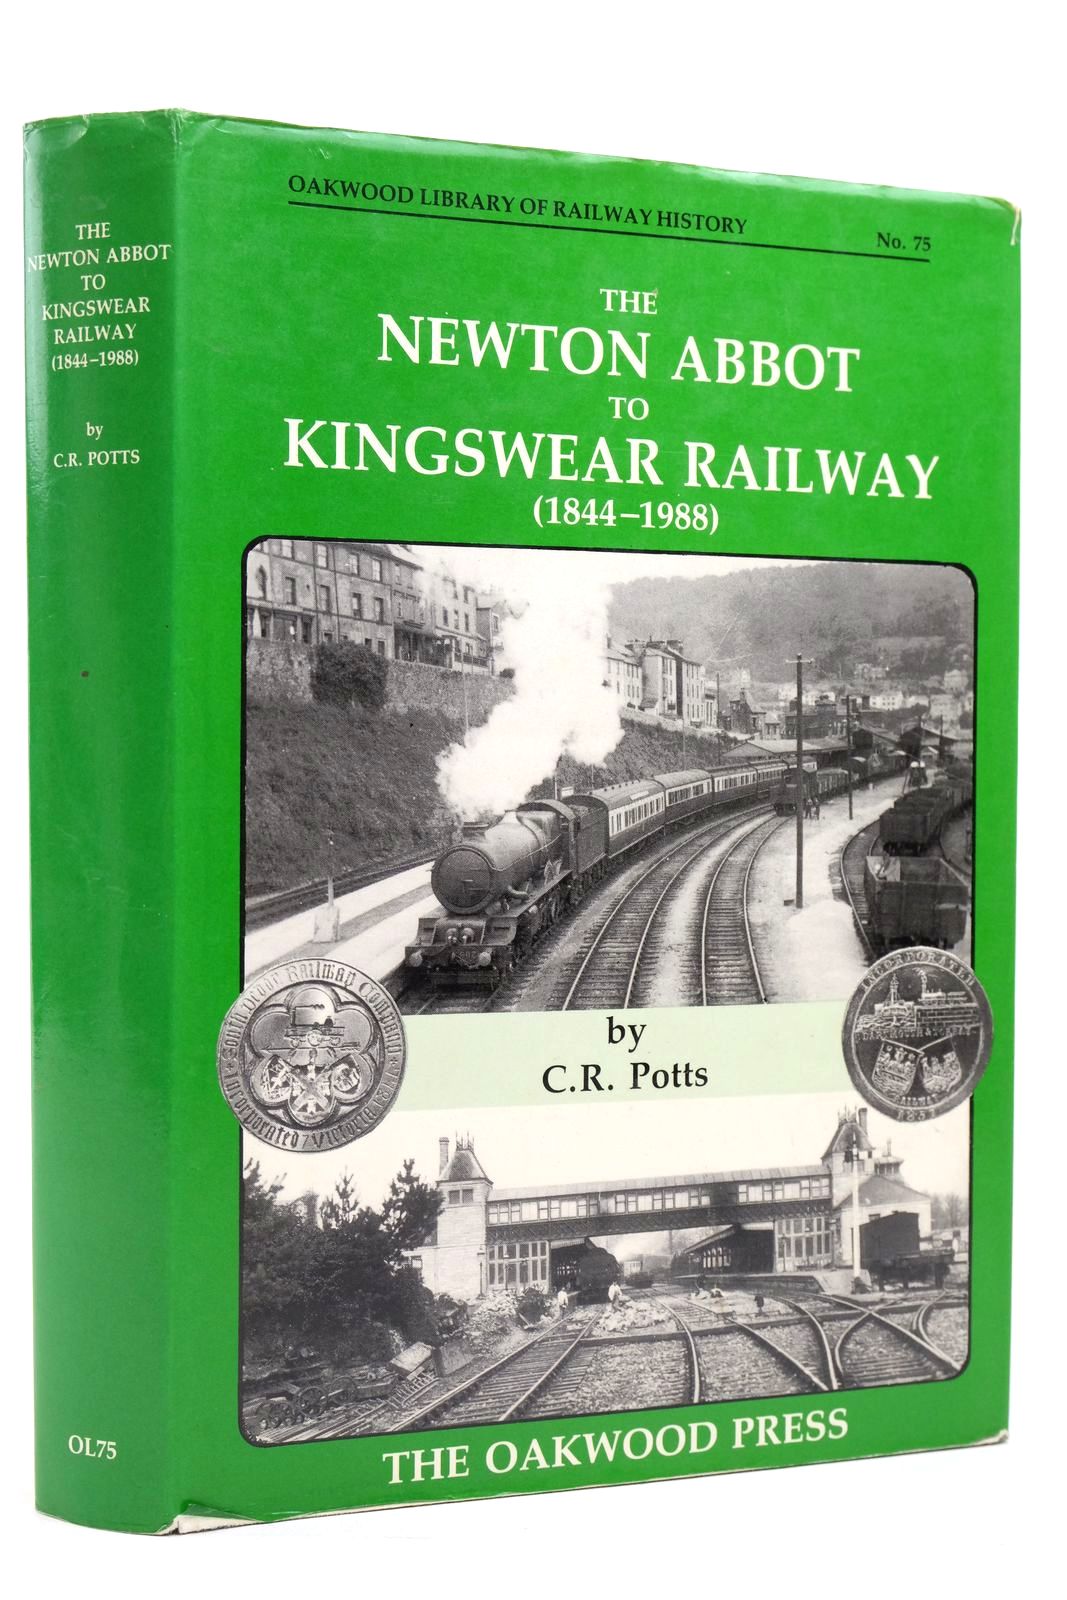 Photo of THE NEWTON ABBOT TO KINGSWEAR RAILWAY (1844-1988) written by Potts, C.R. published by The Oakwood Press (STOCK CODE: 2140803)  for sale by Stella & Rose's Books